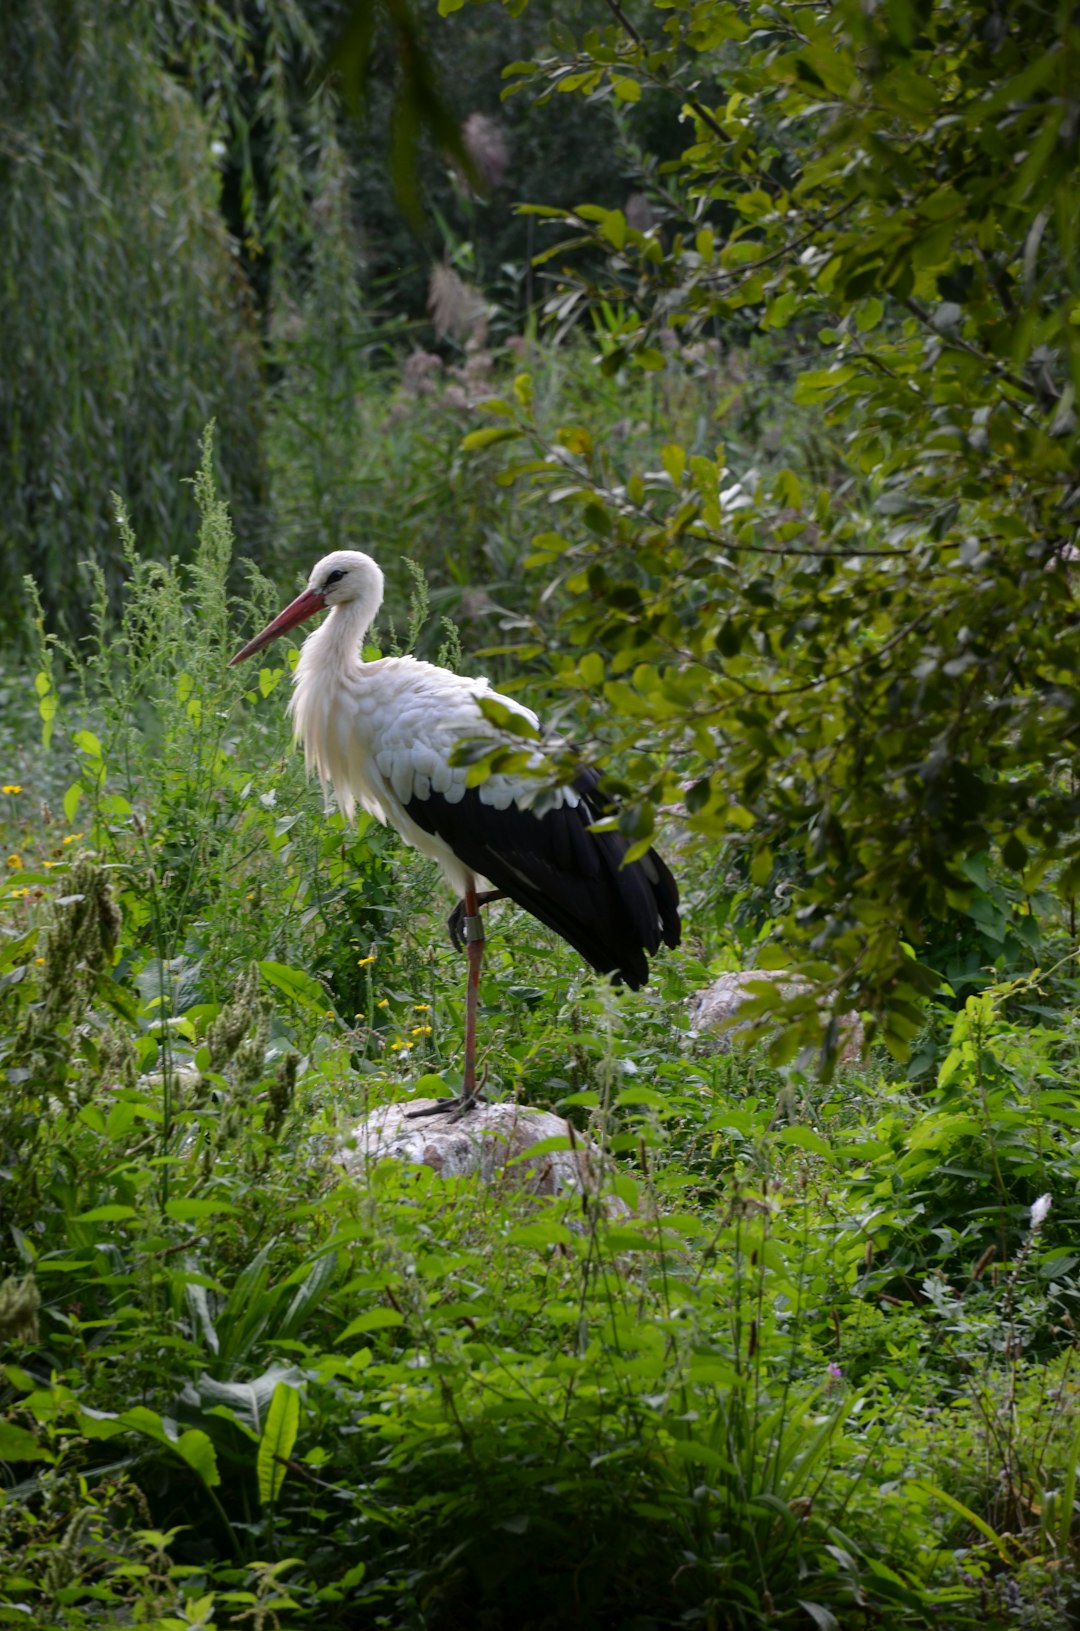  white stork perched on brown tree branch during daytime stork